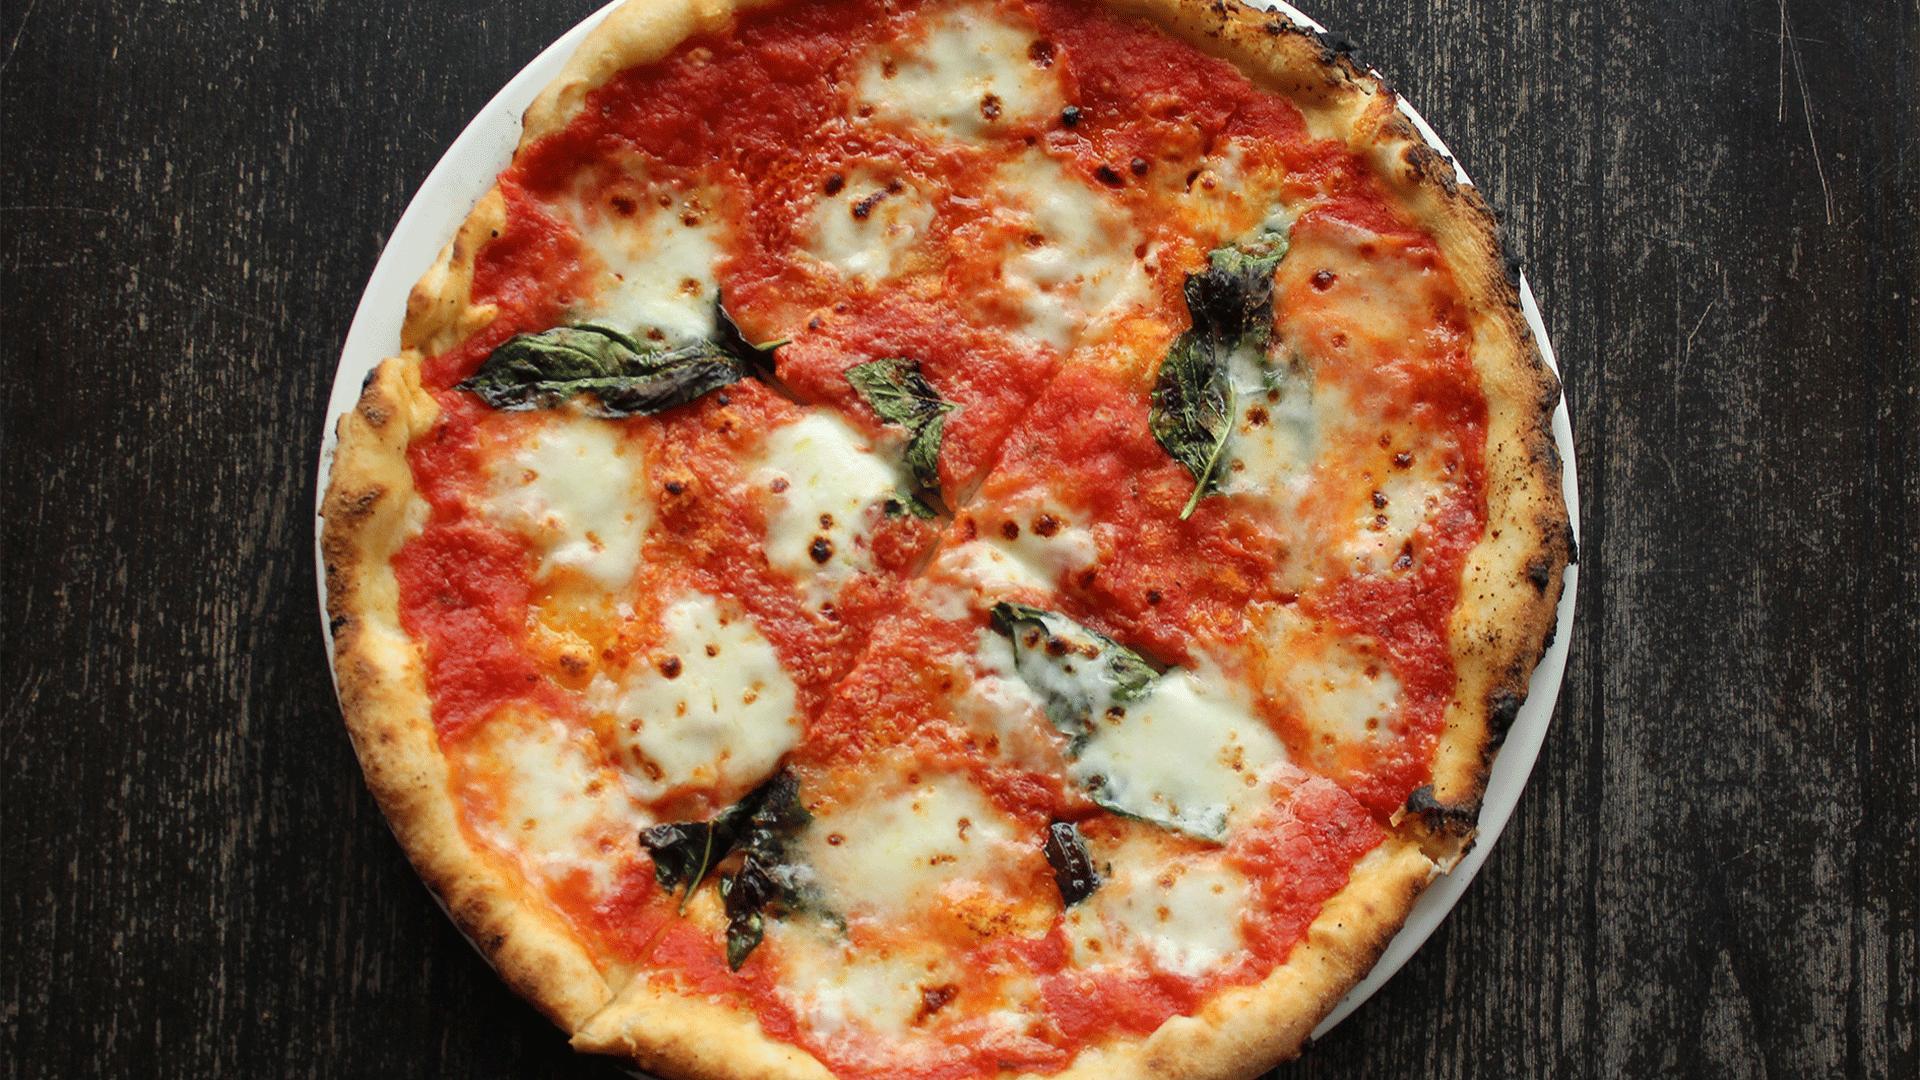 The best restaurants offering delivery and takeout in Toronto: a margherita pizza at Pizzeria Libretto